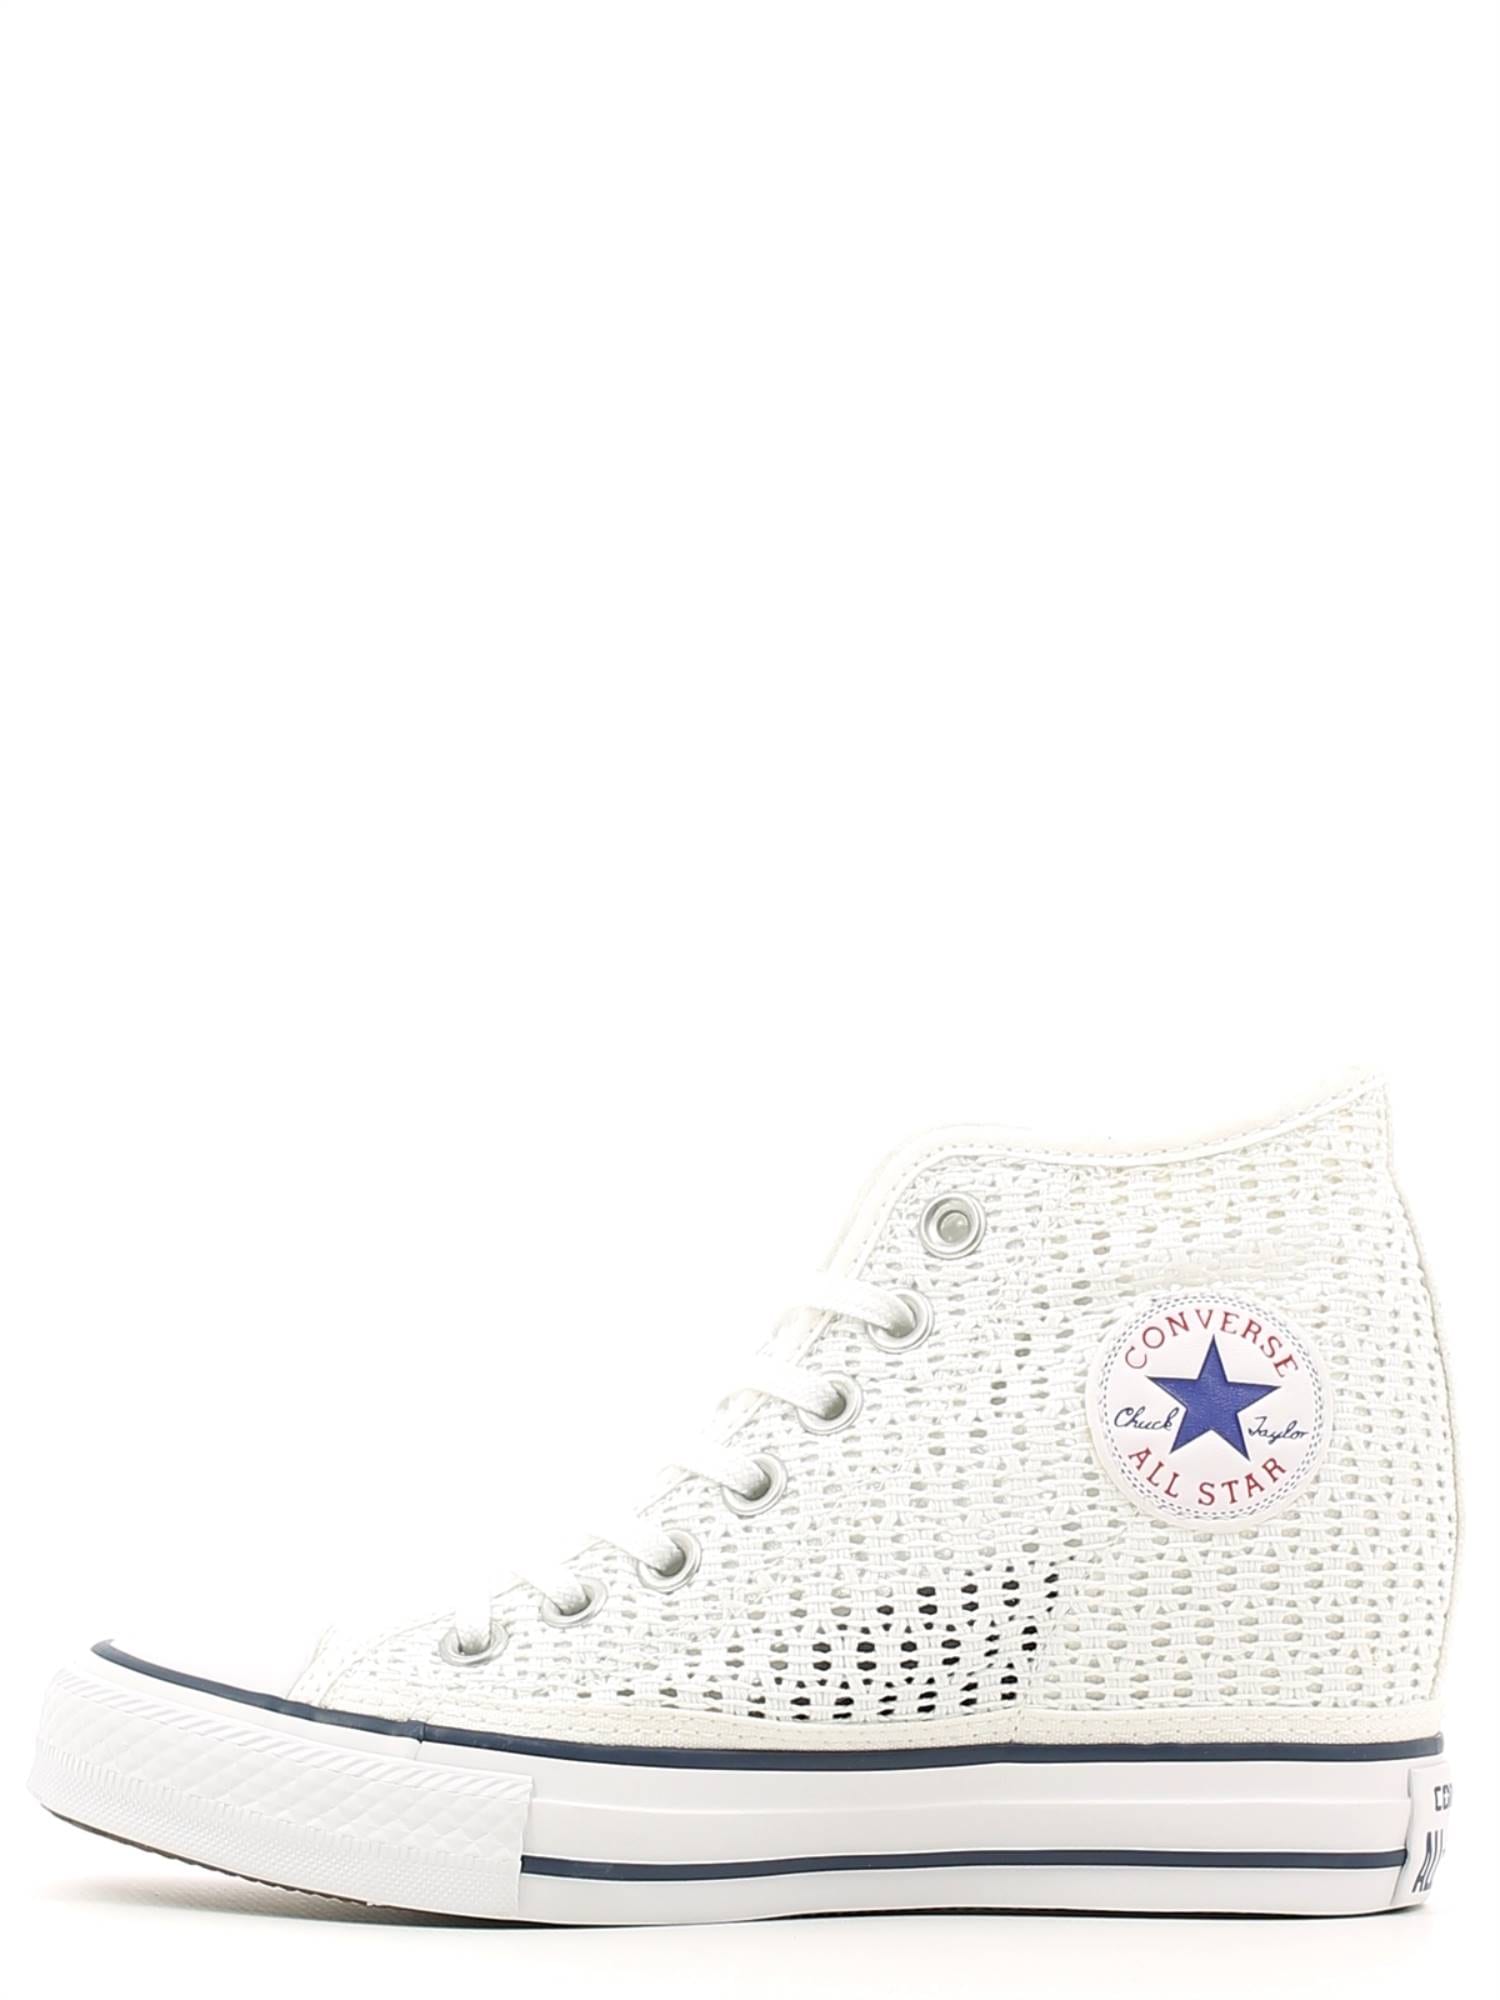 converse all star mid lux crochet